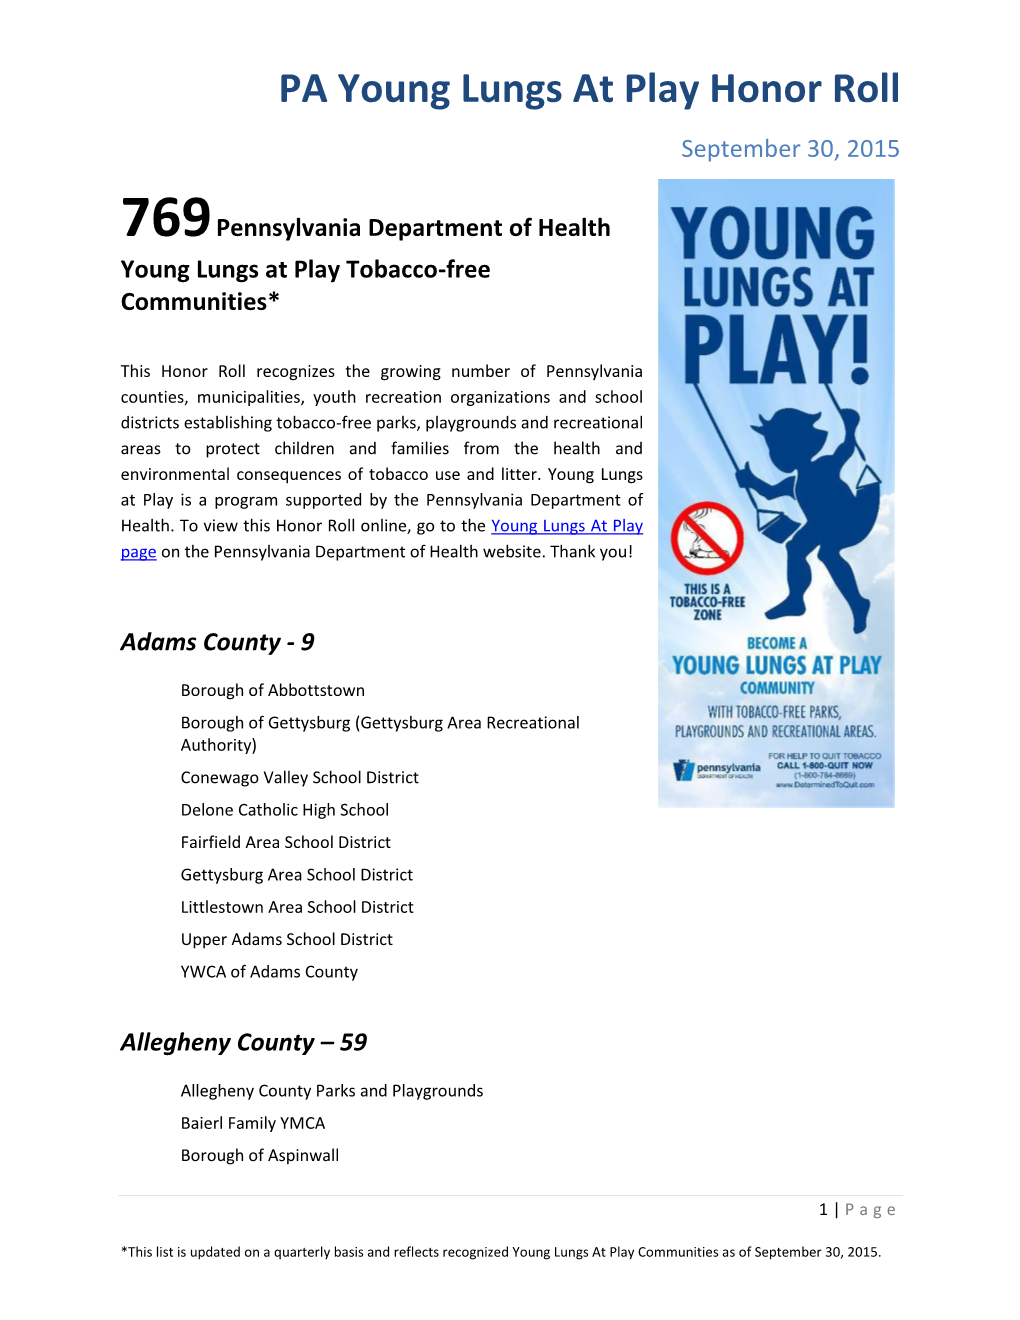 PA Young Lungs at Play Honor Roll September 30, 2015